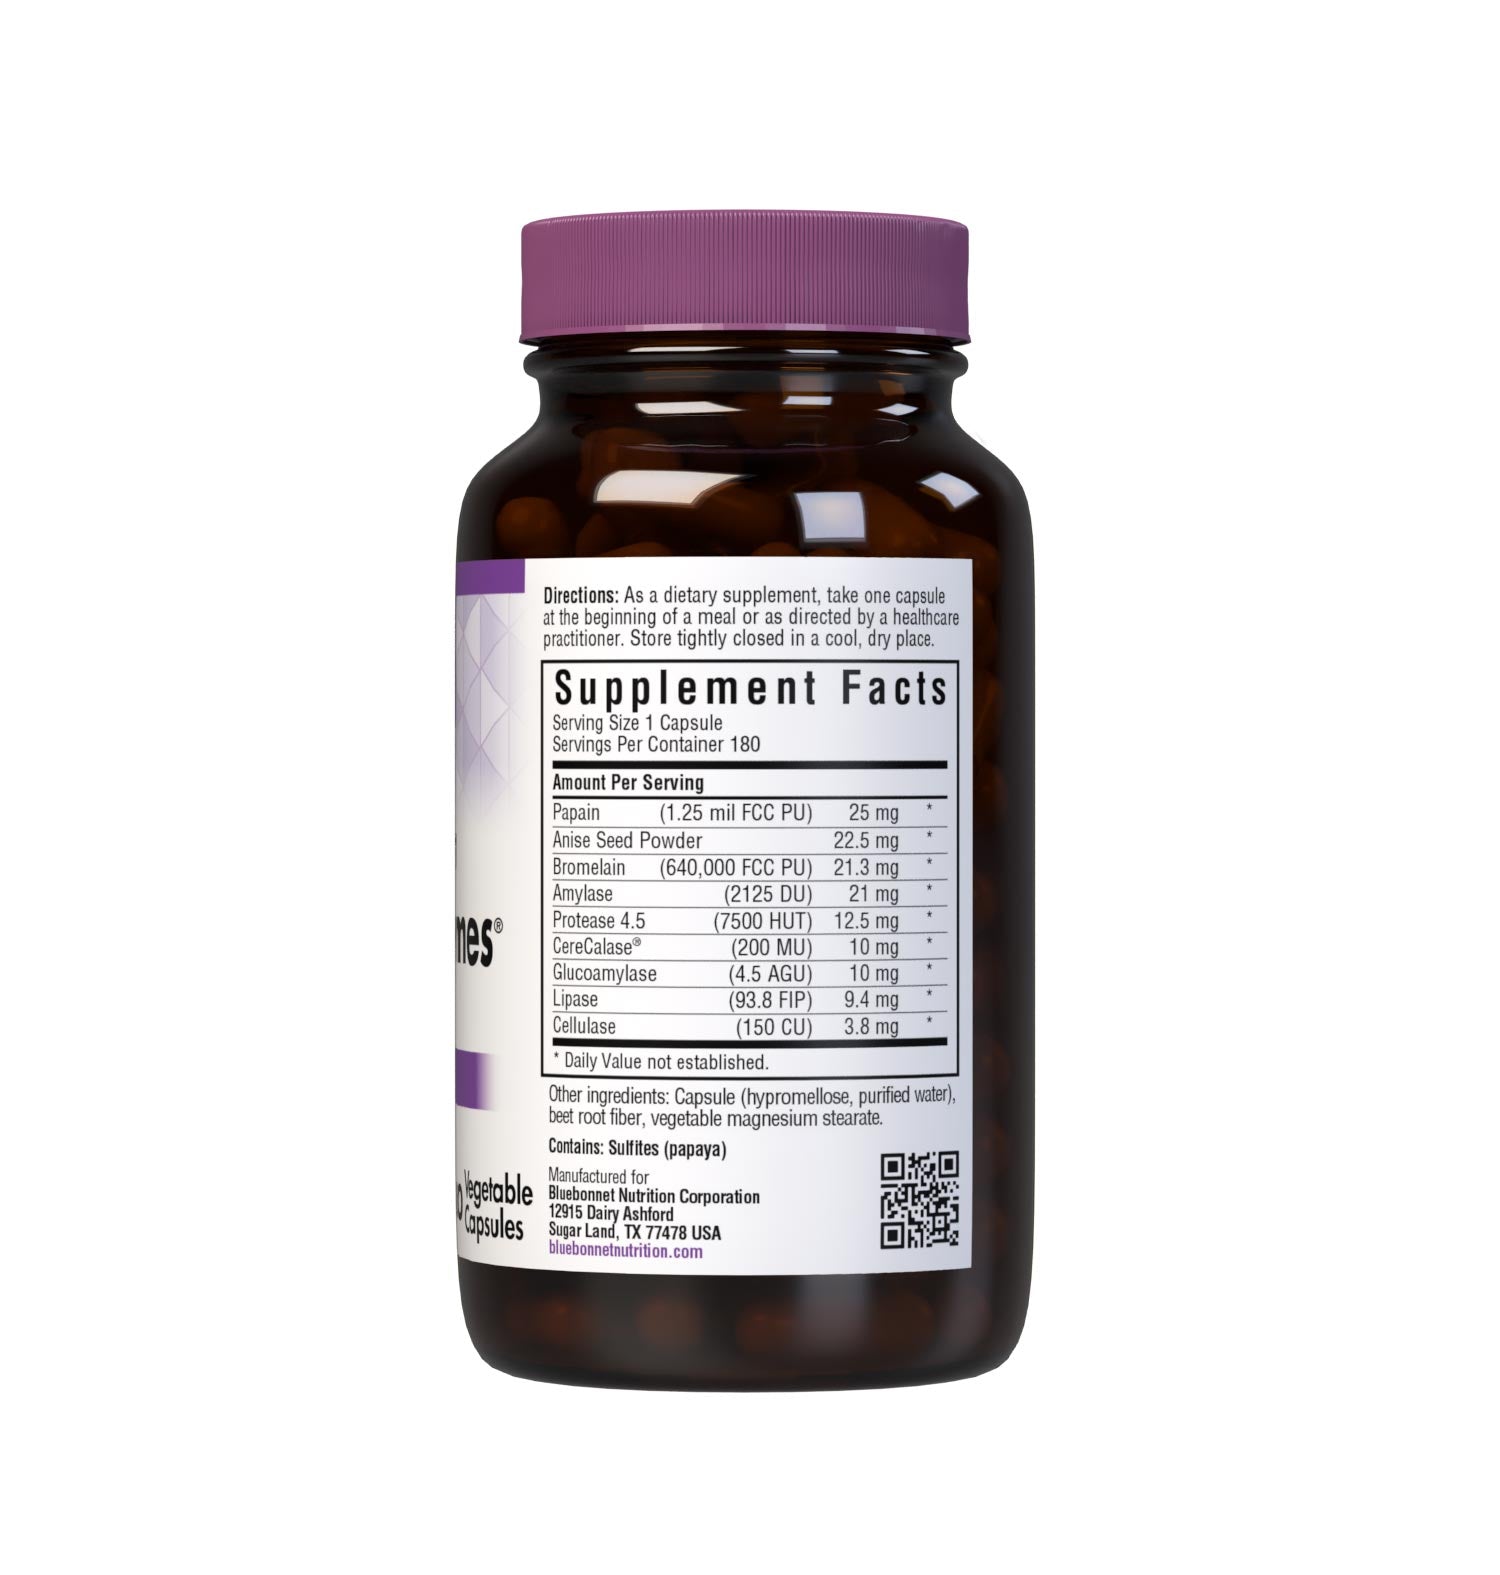 Bluebonnet’s Full Spectrum Optimum Enzymes 180 Vegetable Capsules are formulated with a combination of plant-based enzymes that help support the breakdown of protein, carbohydrates, and fats for digestive health. Supplement facts panel. #size_180 count